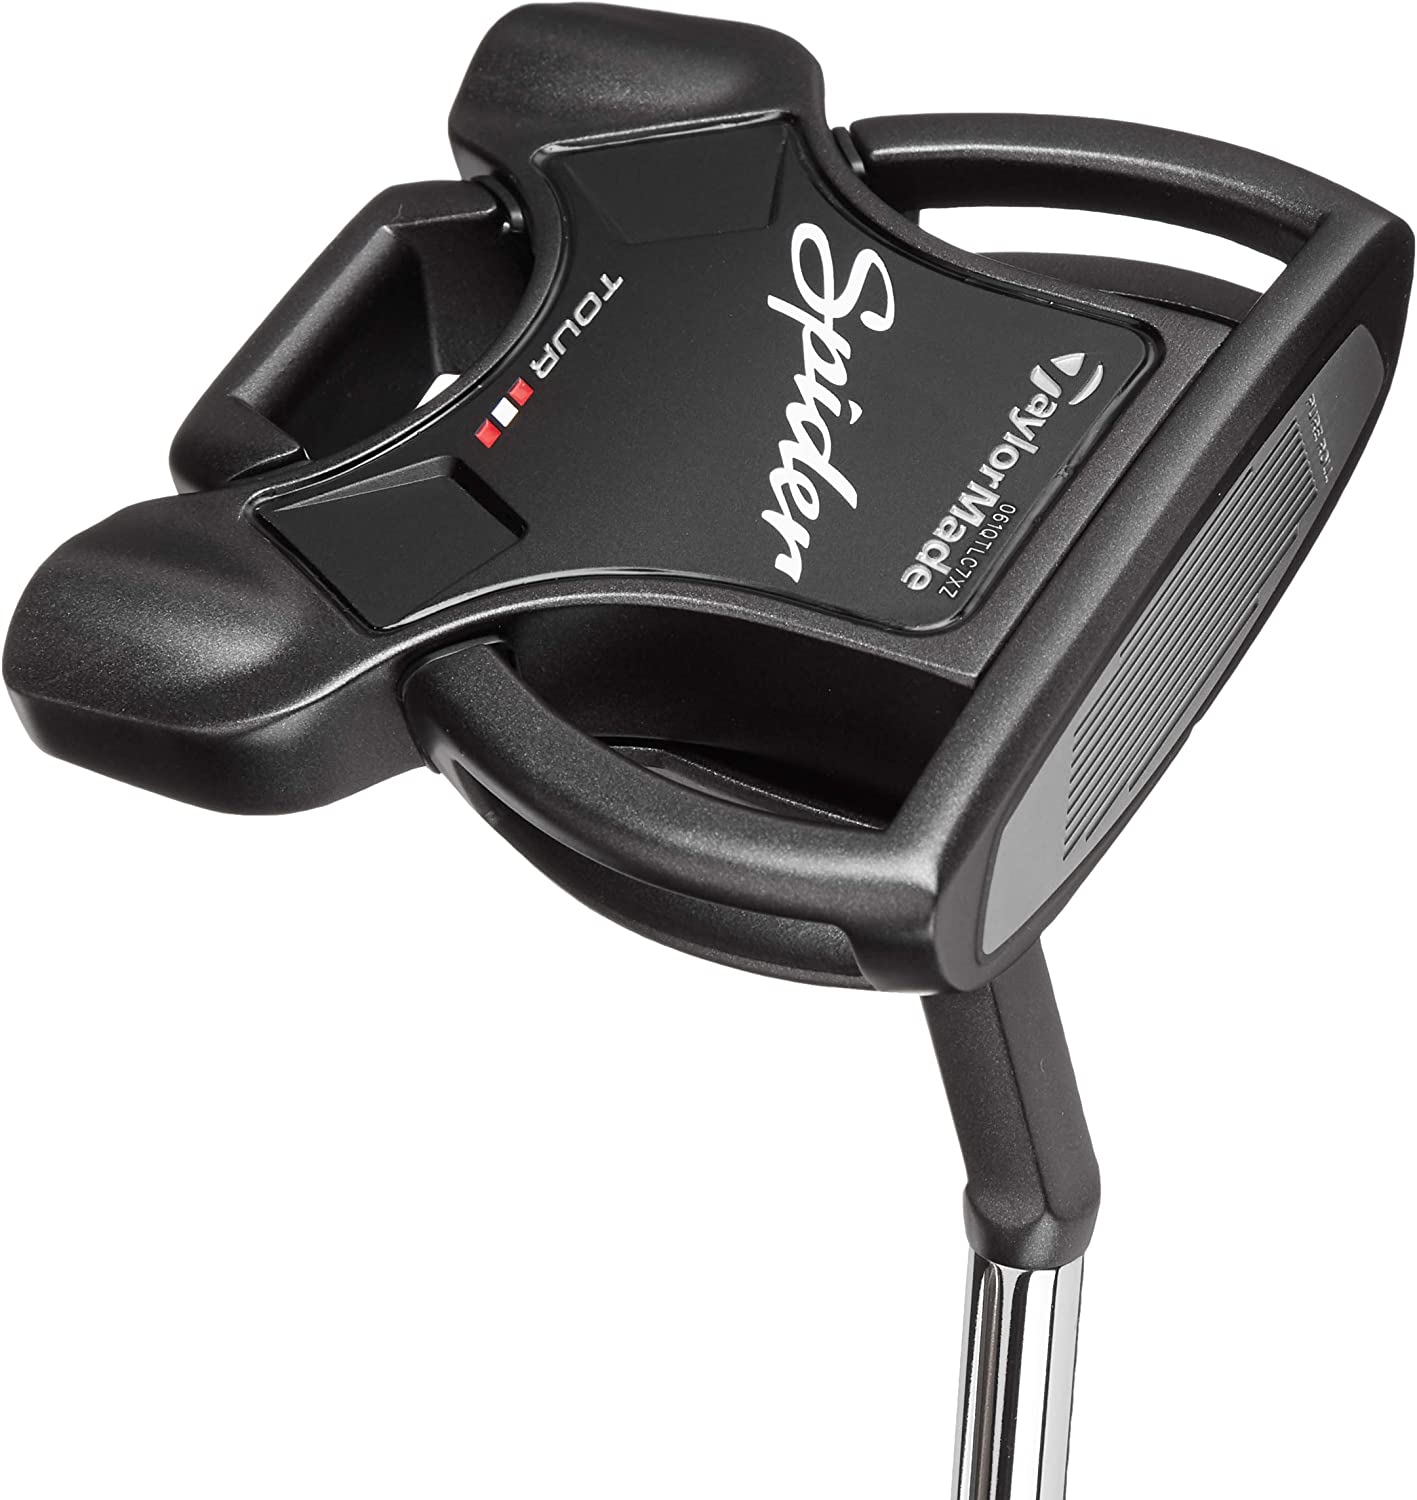 TaylorMade Spider Tour Black Putter #3 Review